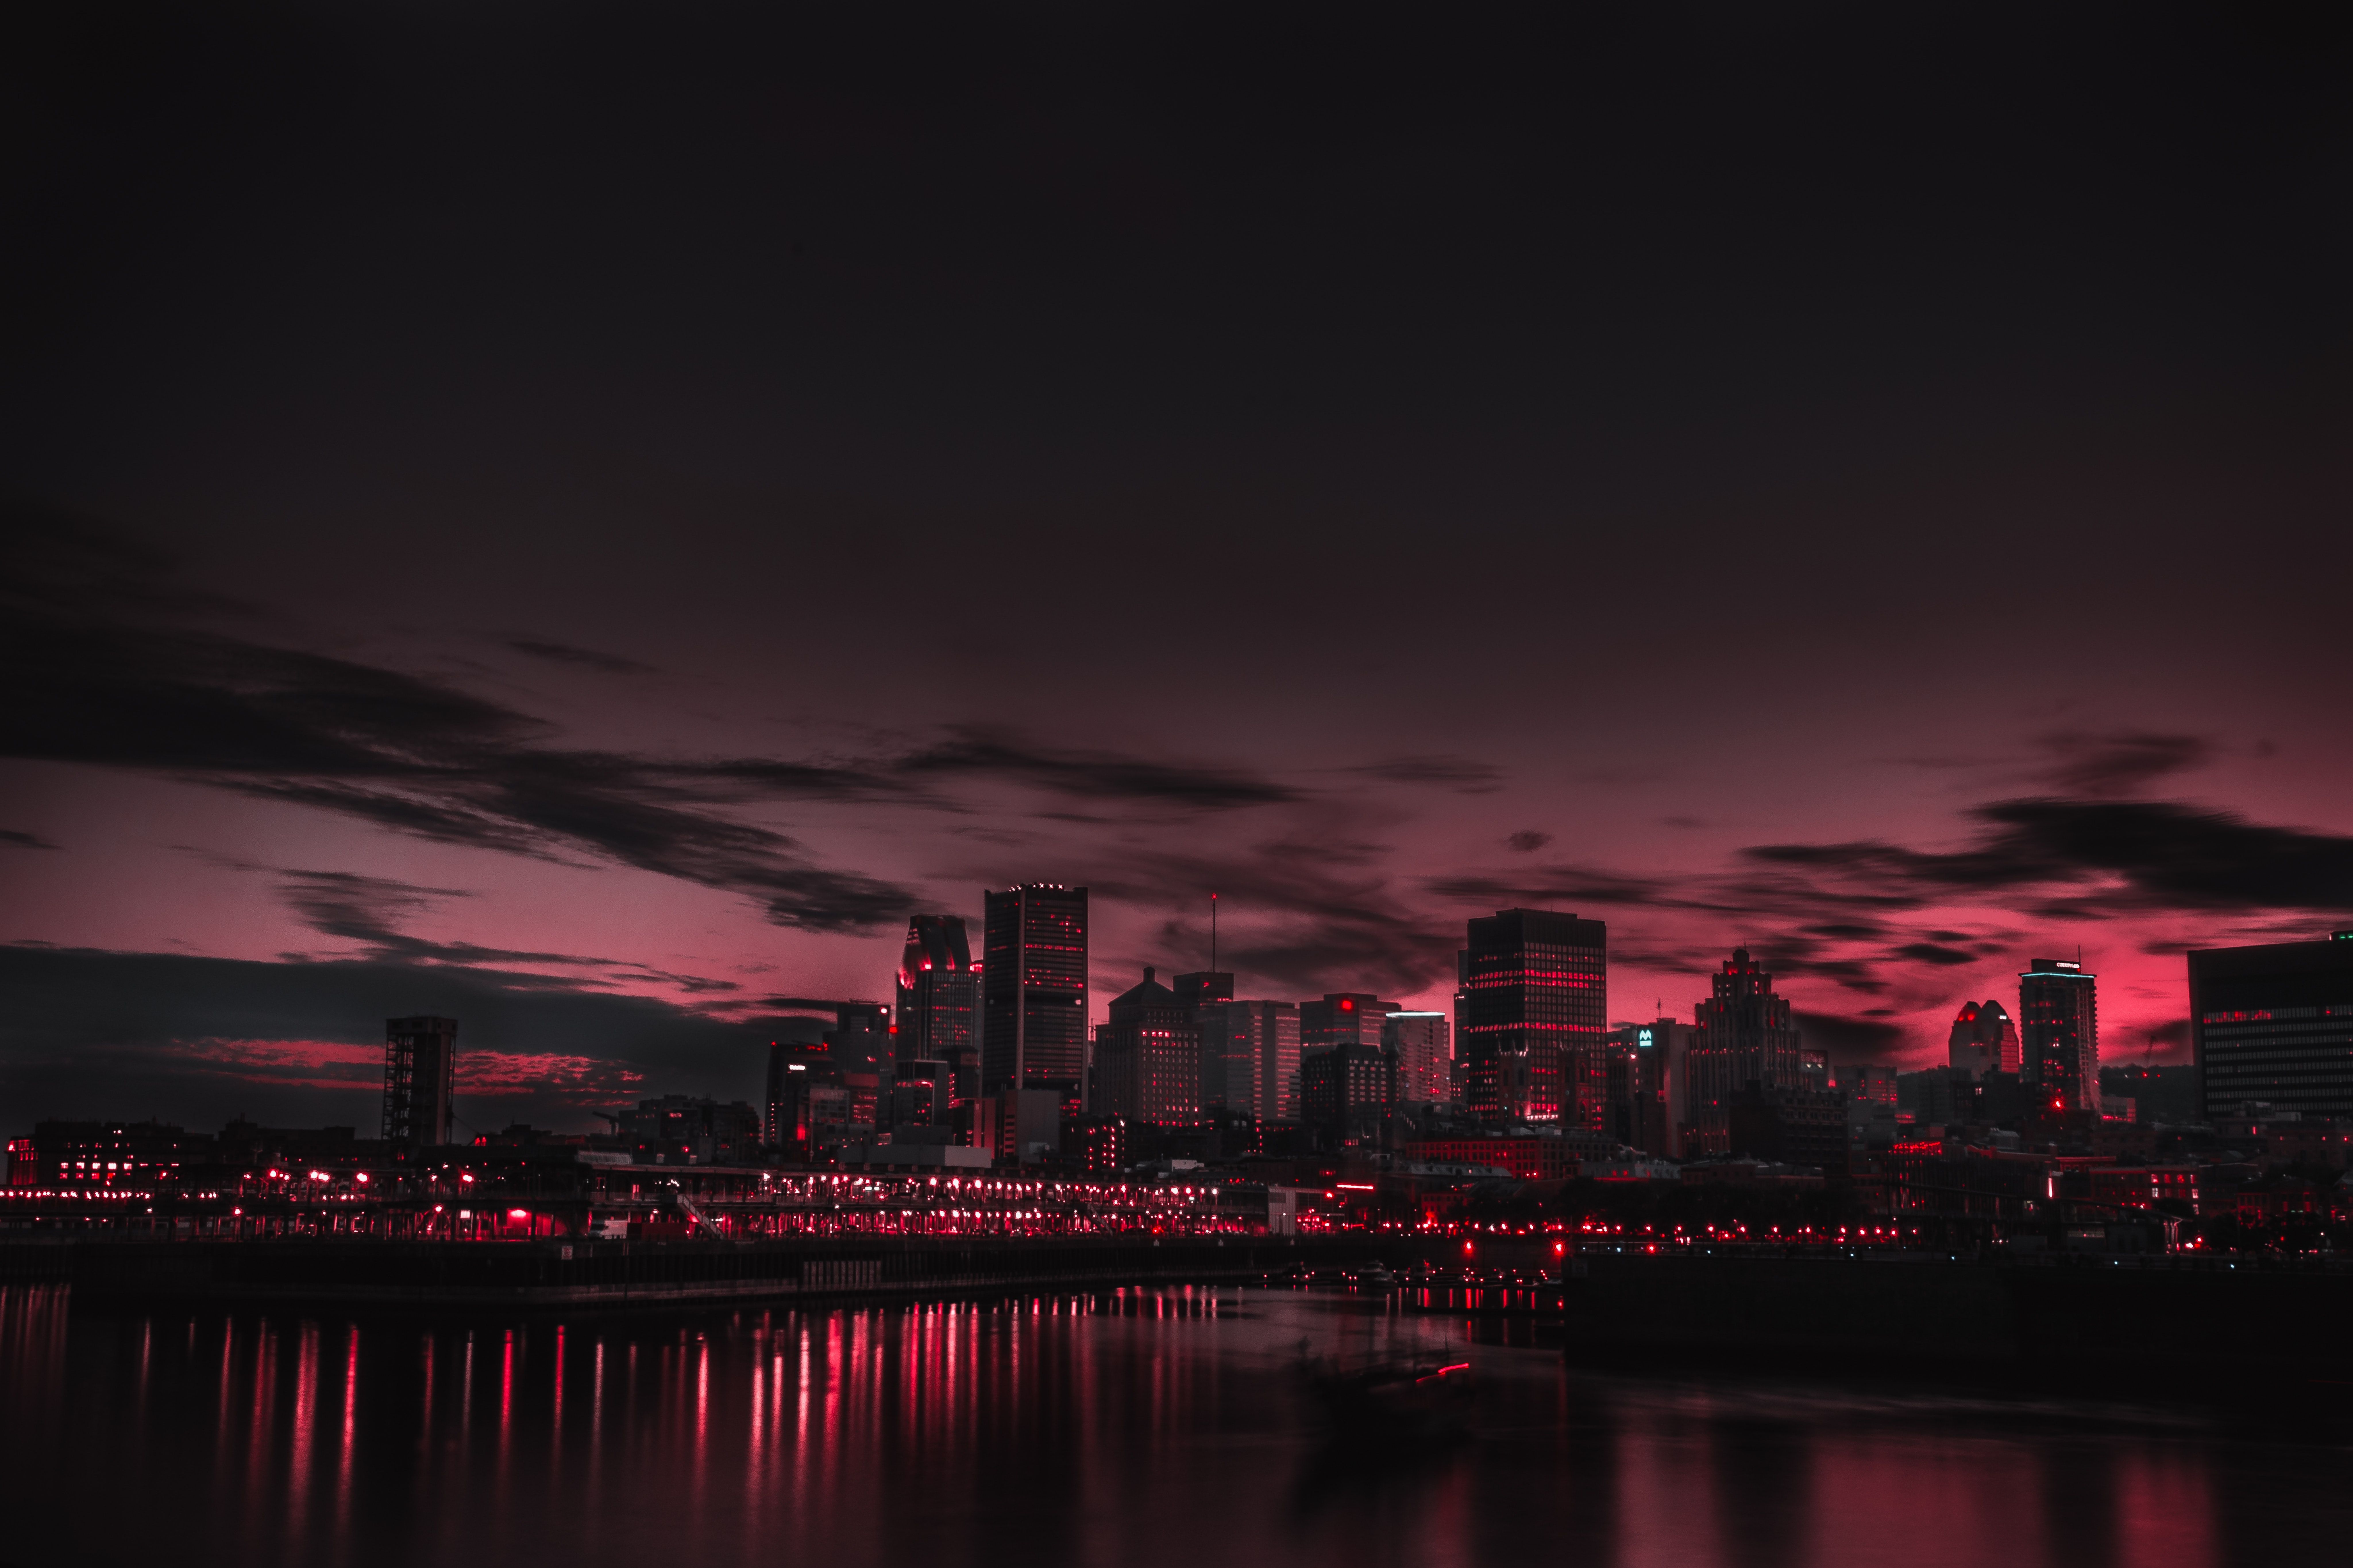 Red City Photo By Marc Olivier Jodoin. Aesthetic Desktop Wallpaper, Laptop Wallpaper, Laptop Wallpaper Desktop Wallpaper